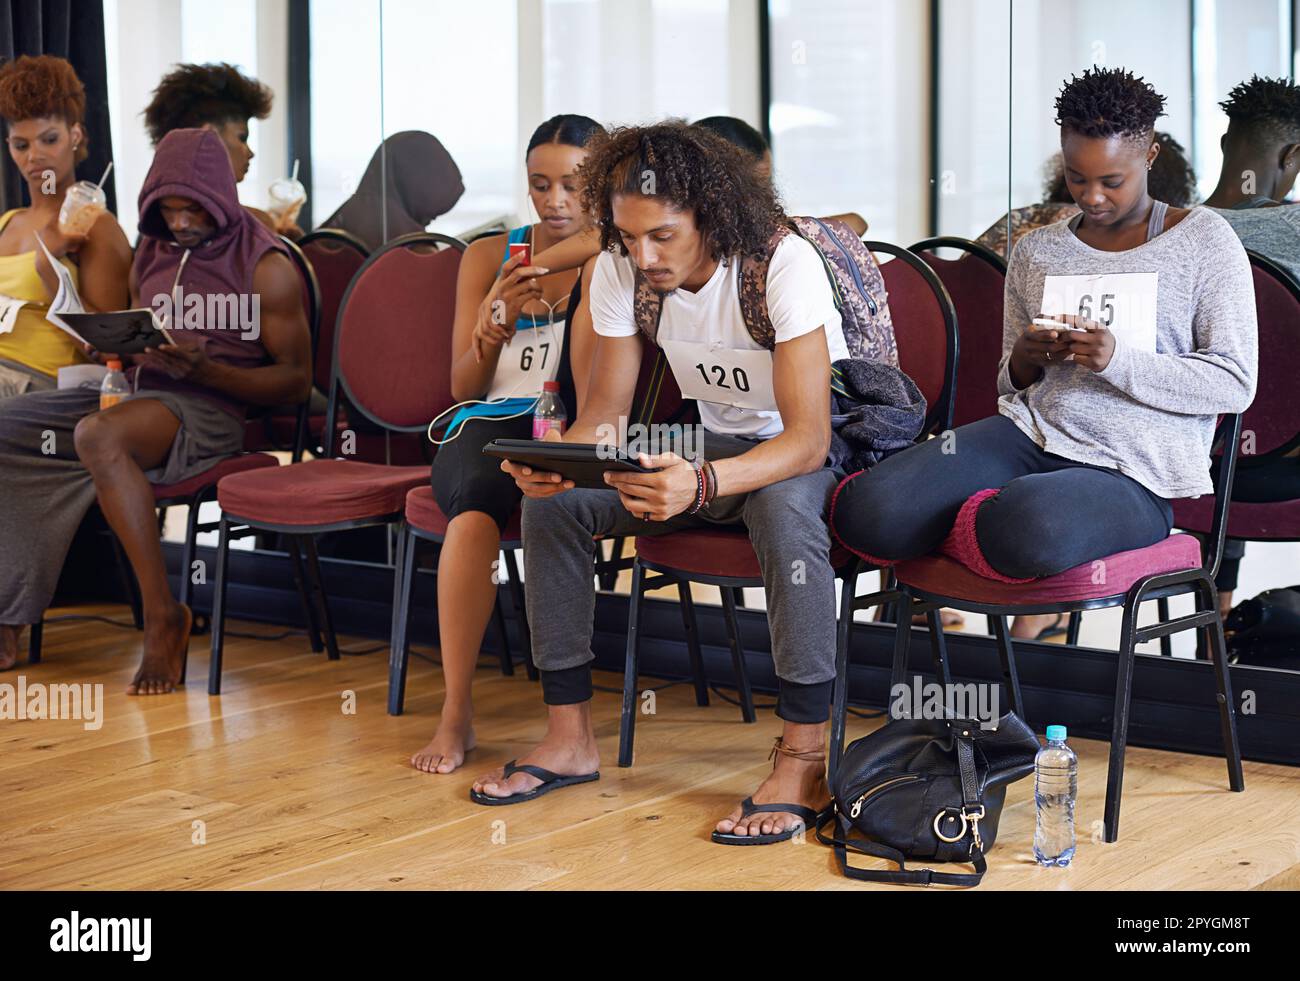 This is taking forever...a group of young dancers sitting and waiting for their dancing auditions. Stock Photo